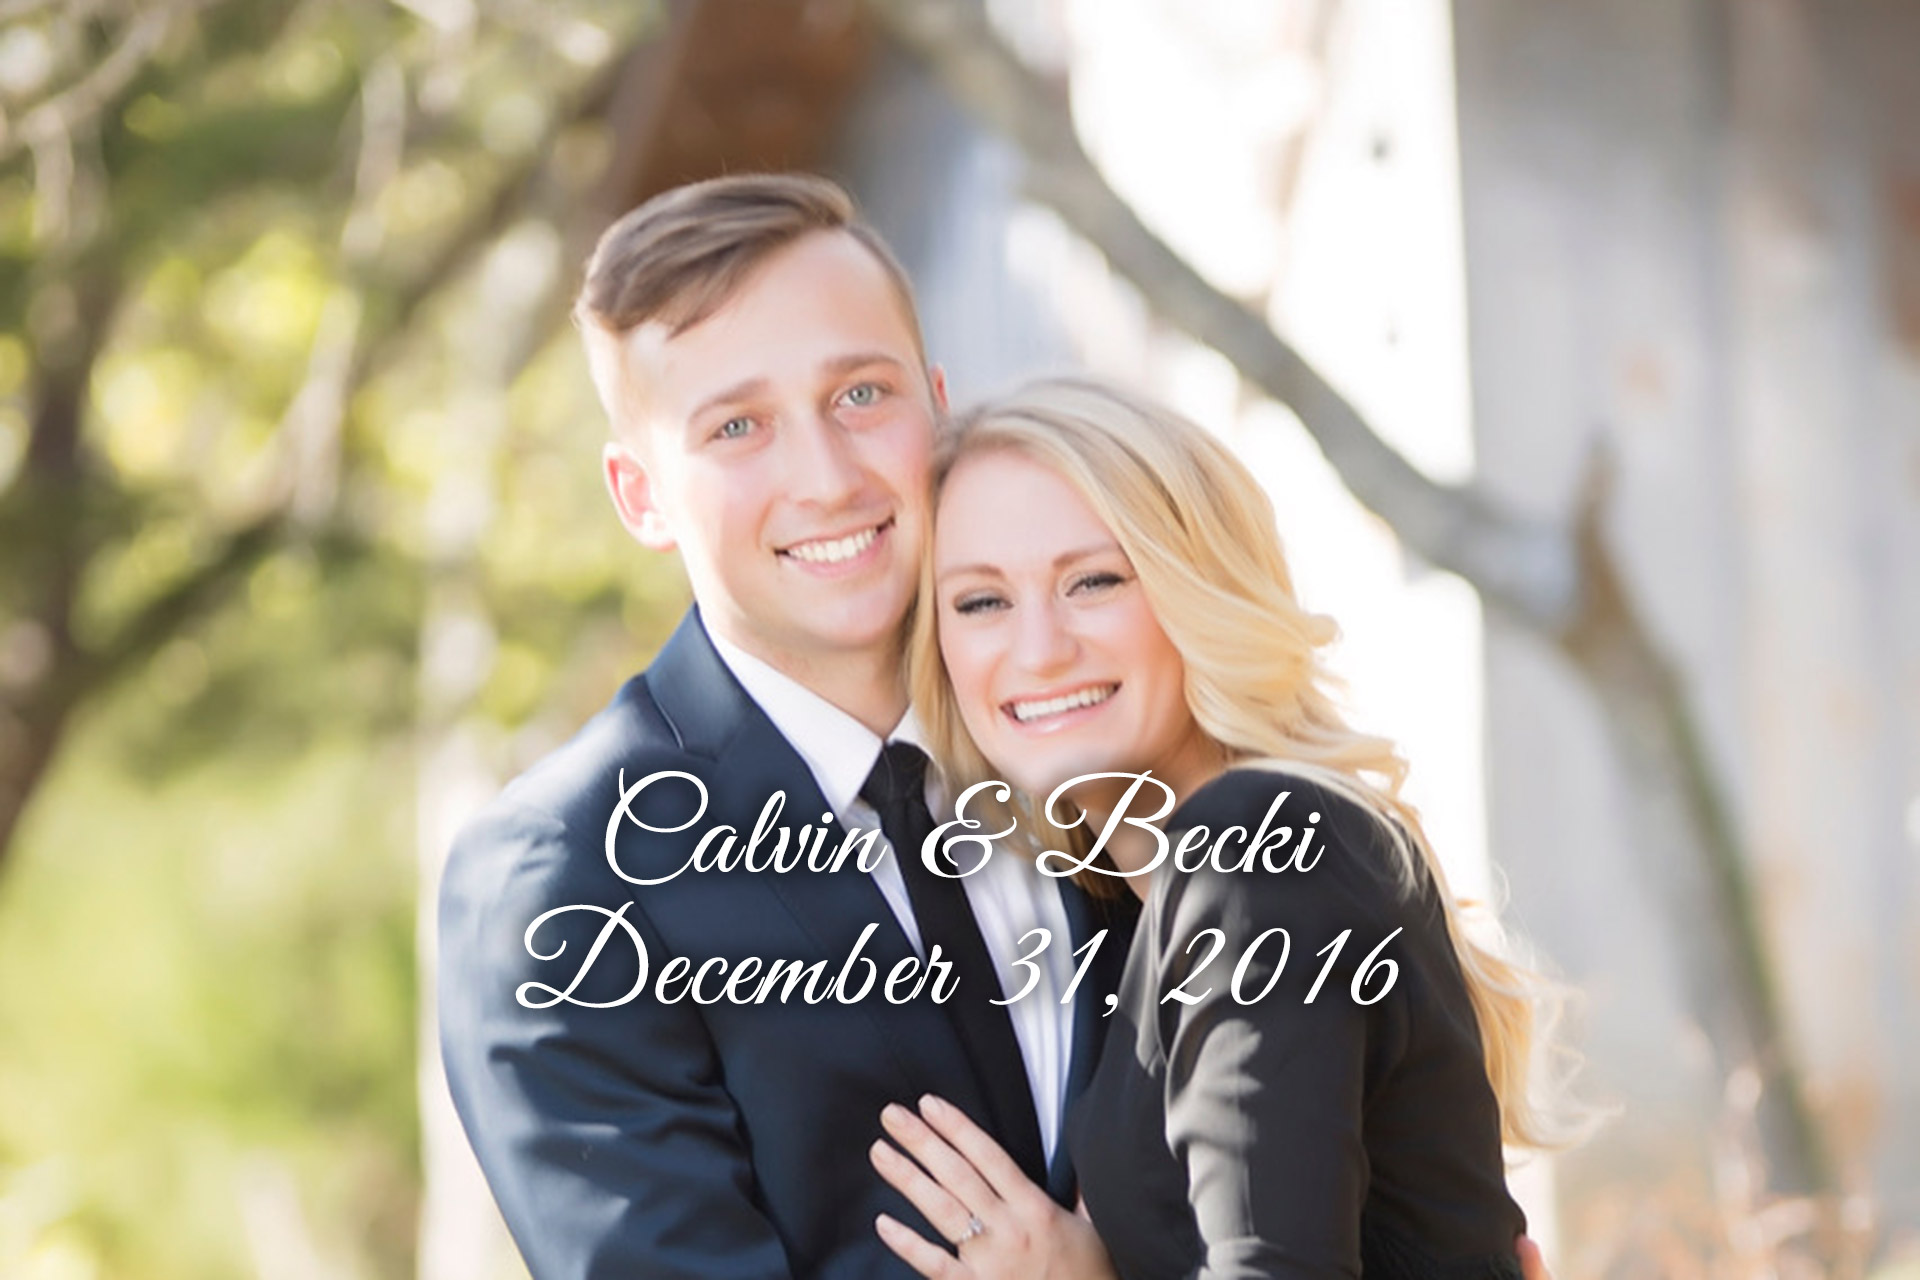 Calvin Voorhis and Becki Sindell Remnant Fellowship Wedding